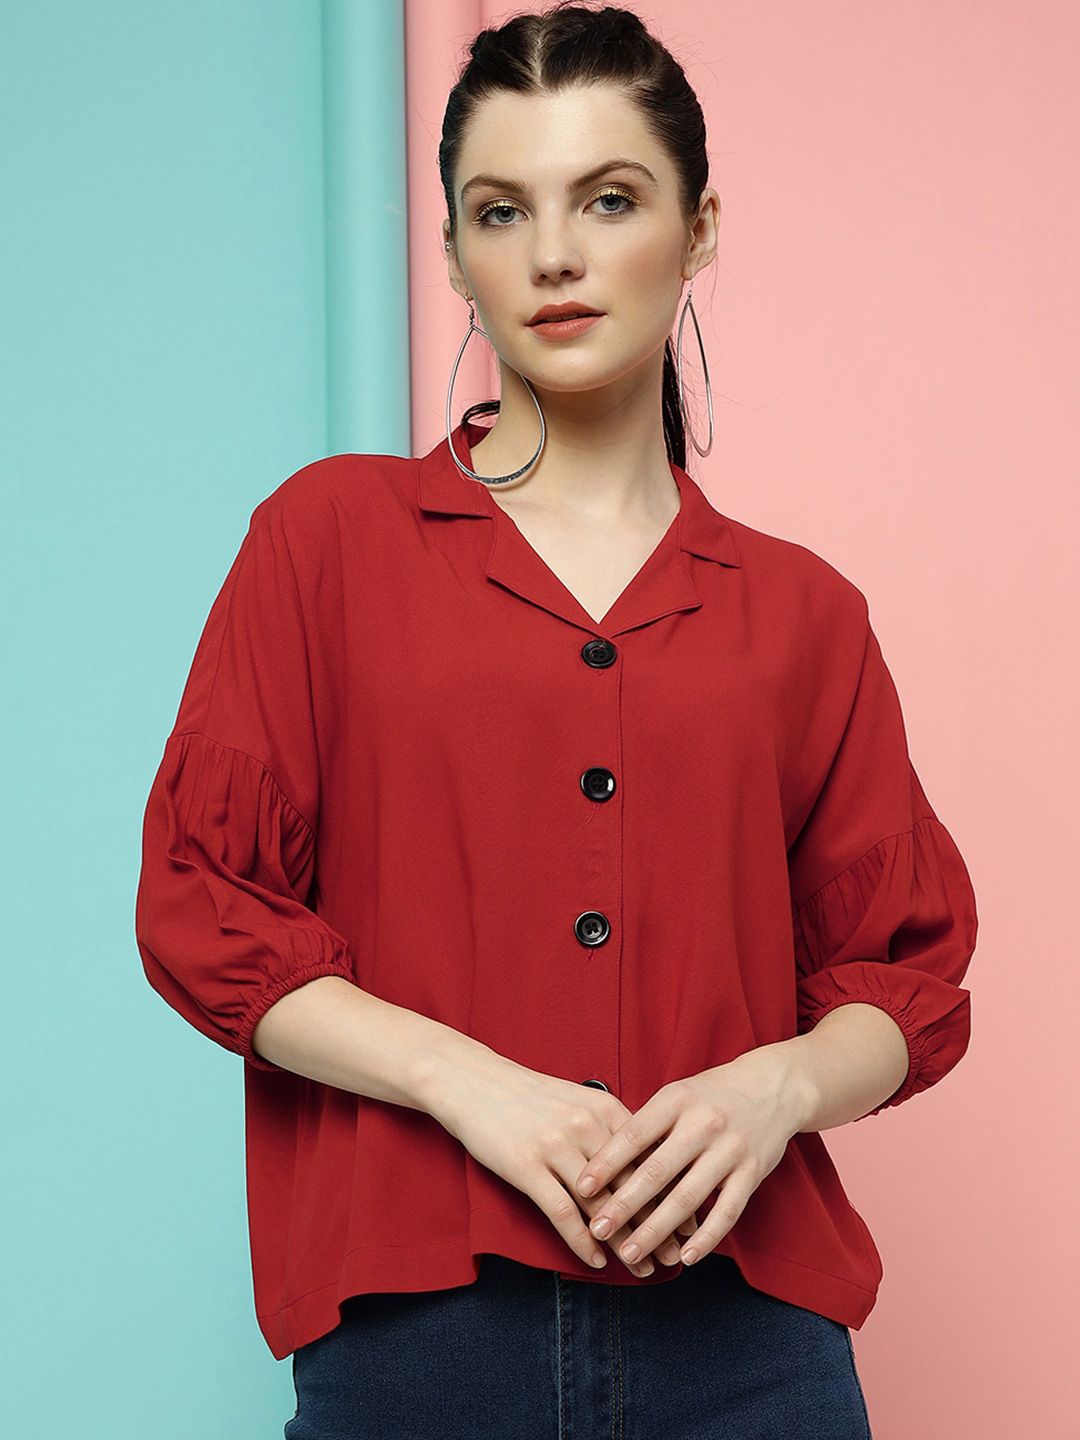 CLEMIRA Puff Sleeves Shirt Style Top Price in India